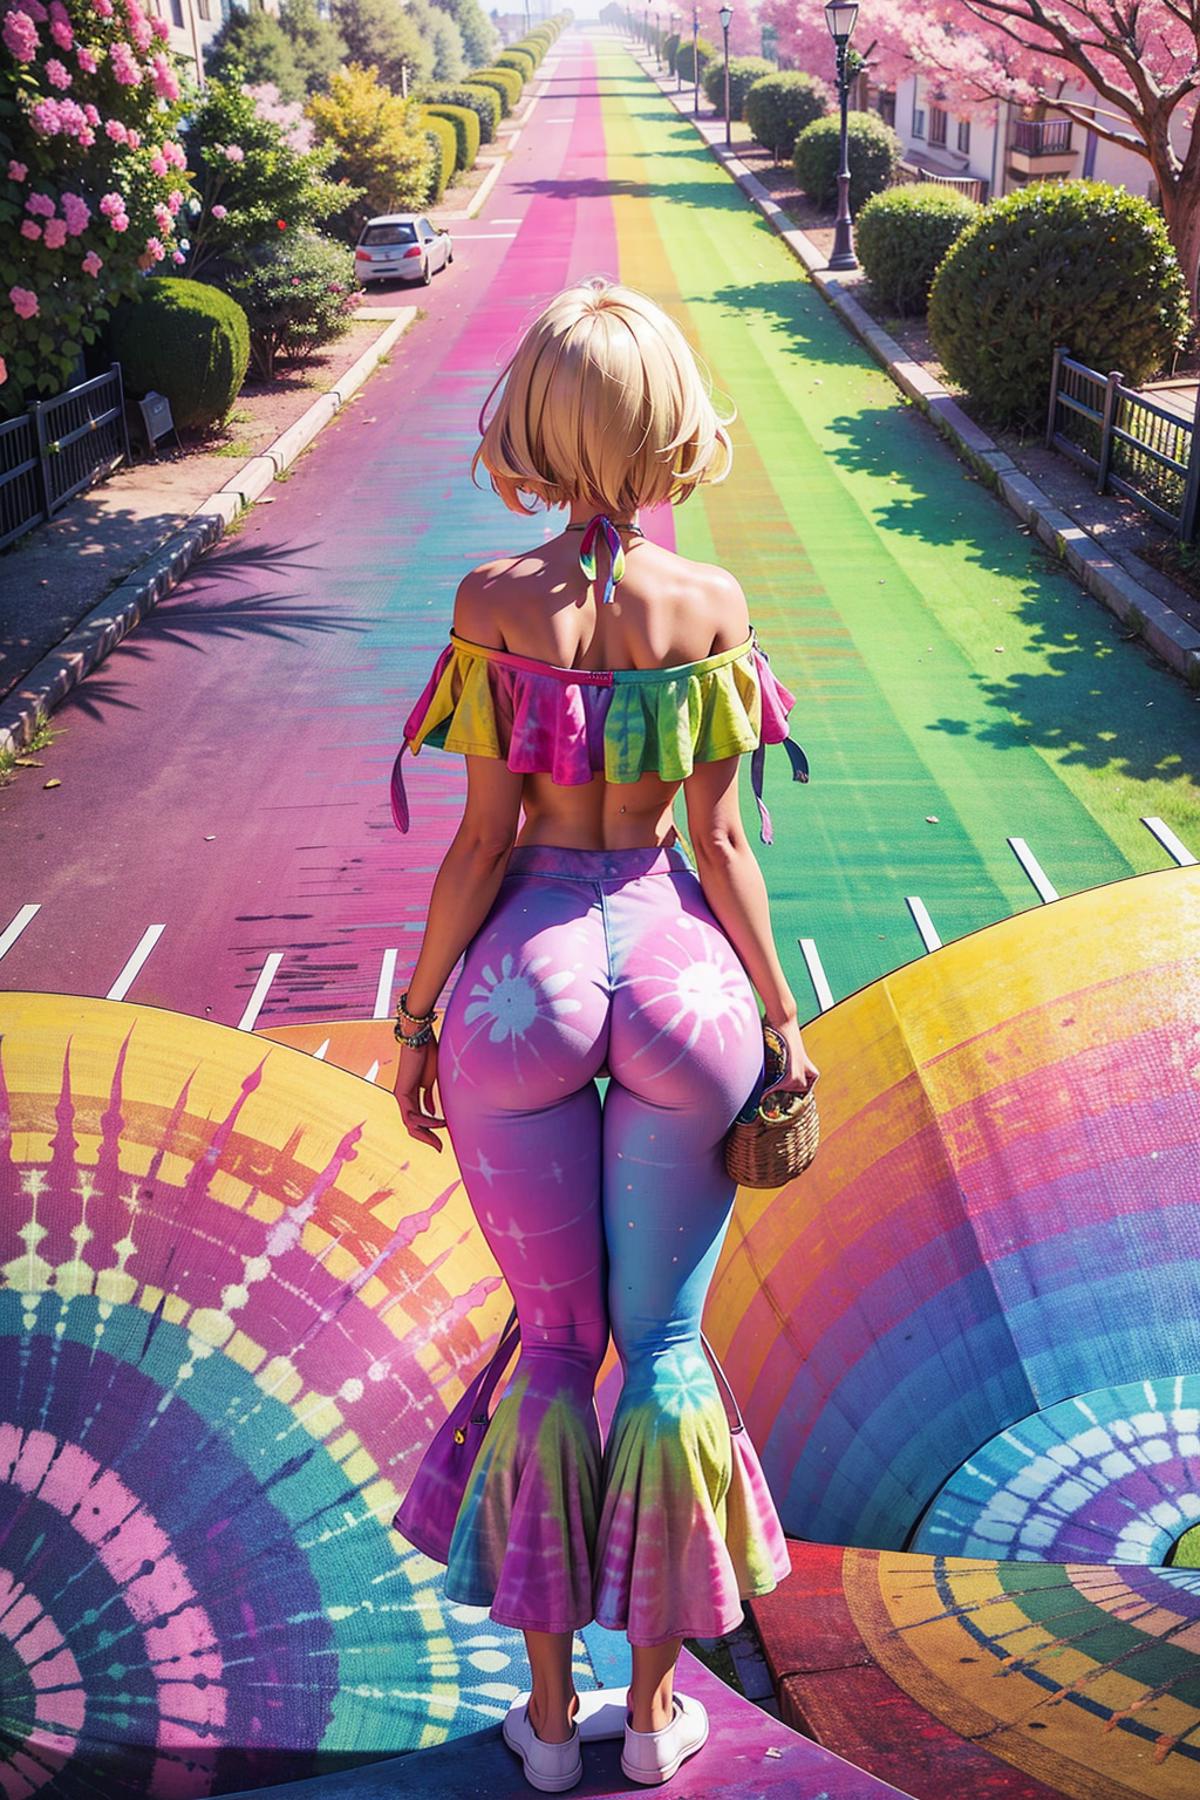 Woman in Colorful Clothing Posing on a Rainbow Road